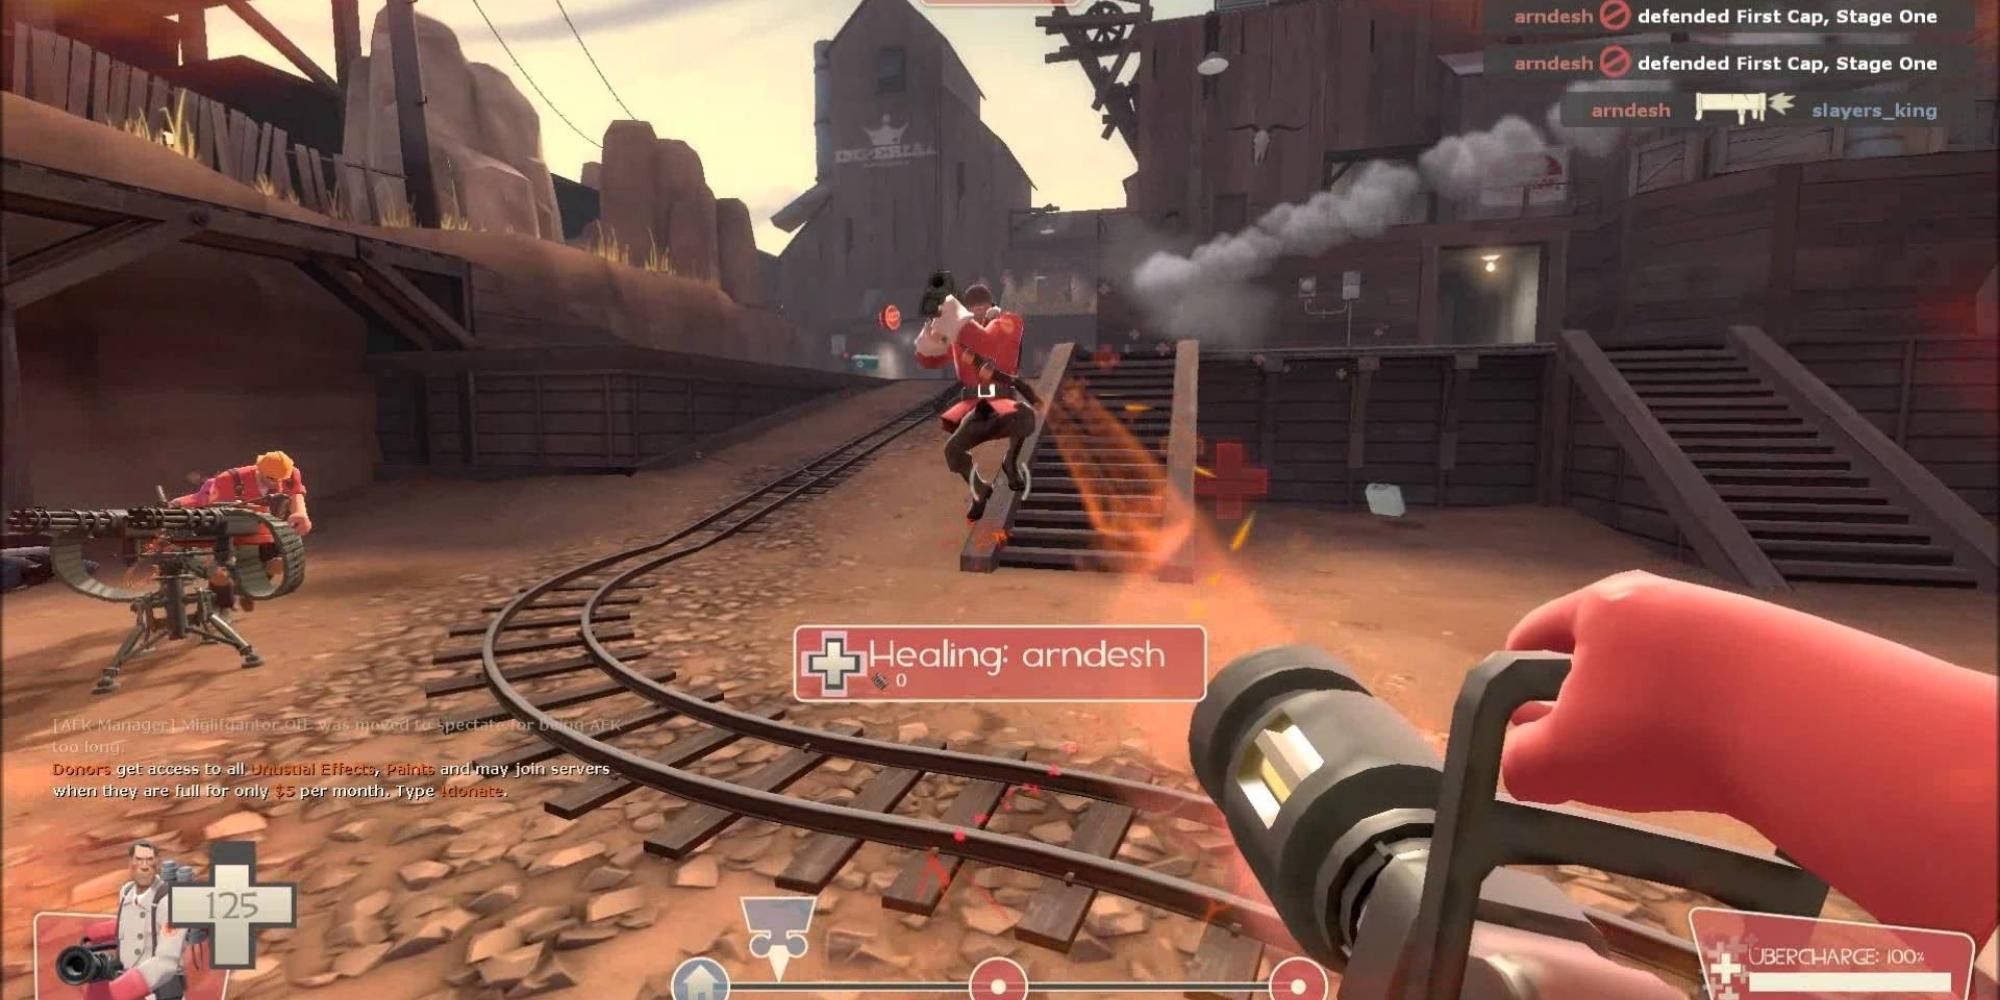 battle in Team Fortress 2